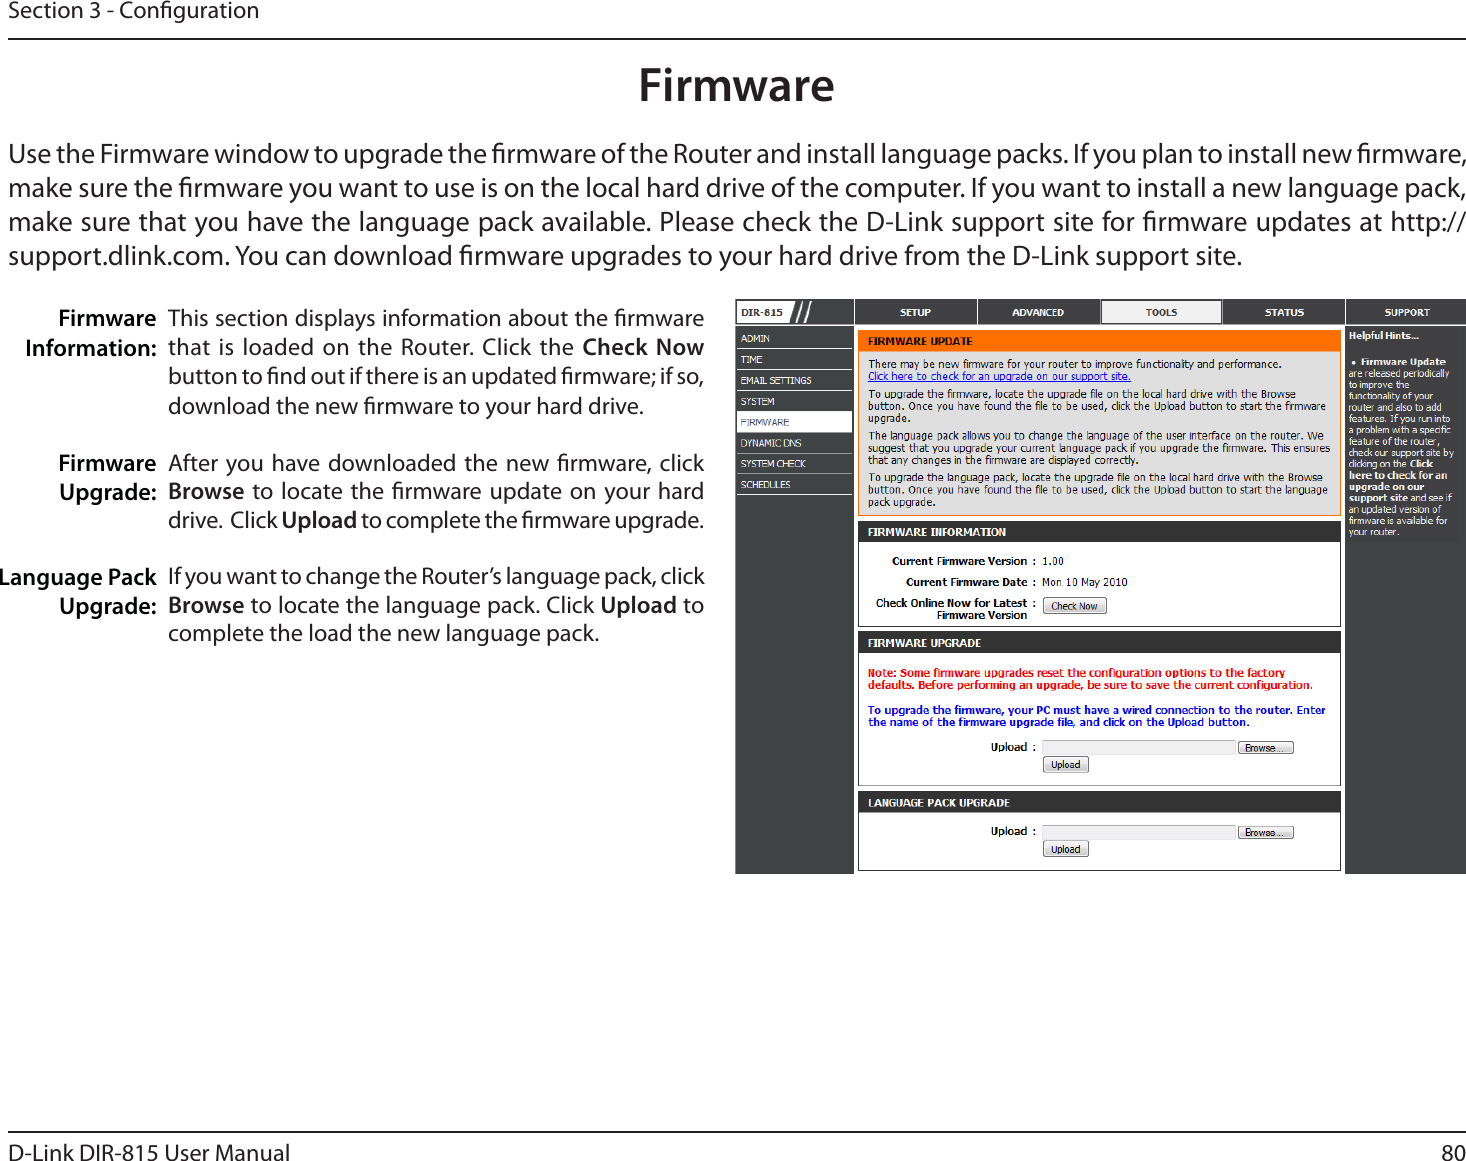 80D-Link DIR-815 User ManualSection 3 - CongurationThis section displays information about the rmware that is loaded on the Router. Click the Check Now button to nd out if there is an updated rmware; if so, download the new rmware to your hard drive.After you have downloaded the new rmware, click Browse to locate the rmware update on your hard drive.  Click Upload to complete the rmware upgrade.If you want to change the Router’s language pack, click Browse to locate the language pack. Click Upload to complete the load the new language pack.Firmware Information:Firmware Upgrade:Language Pack Upgrade:FirmwareUse the Firmware window to upgrade the rmware of the Router and install language packs. If you plan to install new rmware, make sure the rmware you want to use is on the local hard drive of the computer. If you want to install a new language pack, make sure that you have the language pack available. Please check the D-Link support site for rmware updates at http://TVQQPSUEMJOLDPN:PVDBOEPXOMPBEöSNXBSFVQHSBEFTUPZPVSIBSEESJWFGSPNUIF%-JOLTVQQPSUTJUF